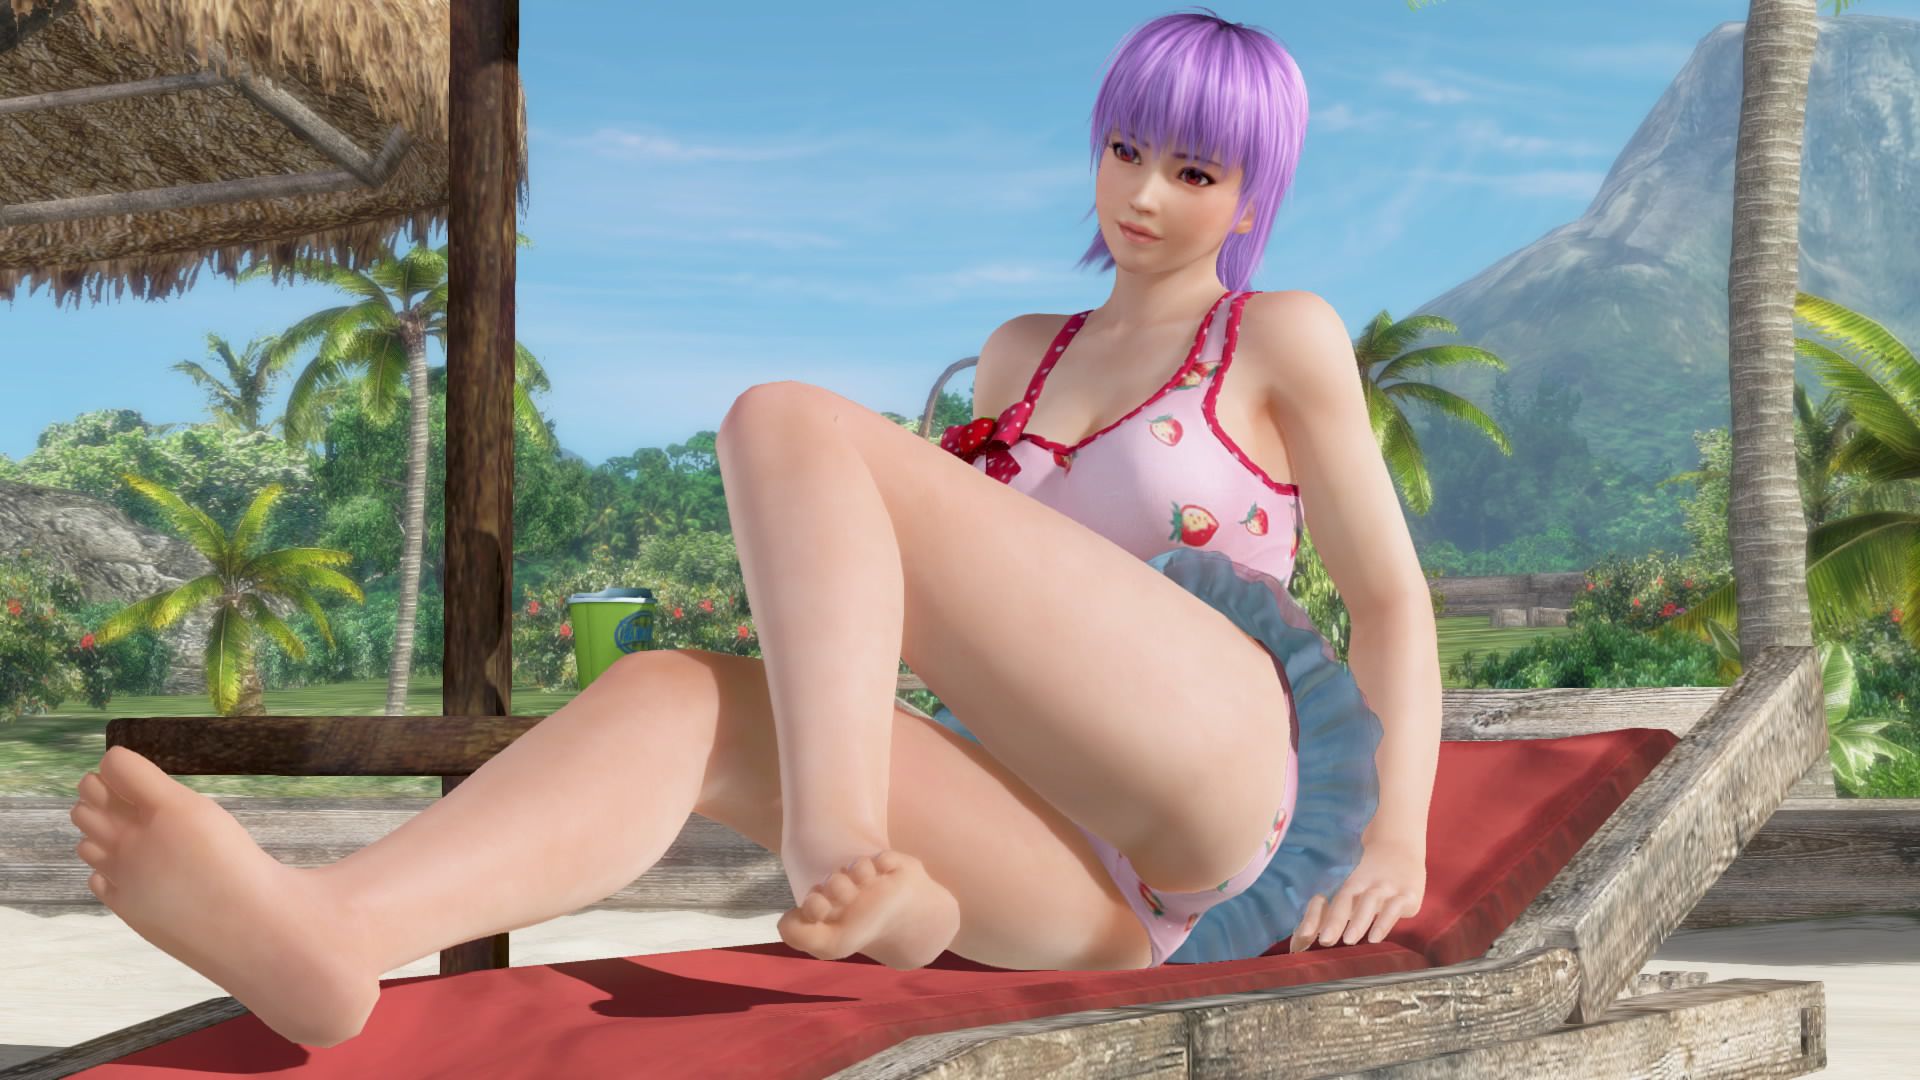 Doax3 "The color which suits the Aya-chan is pink" theory is verified 14